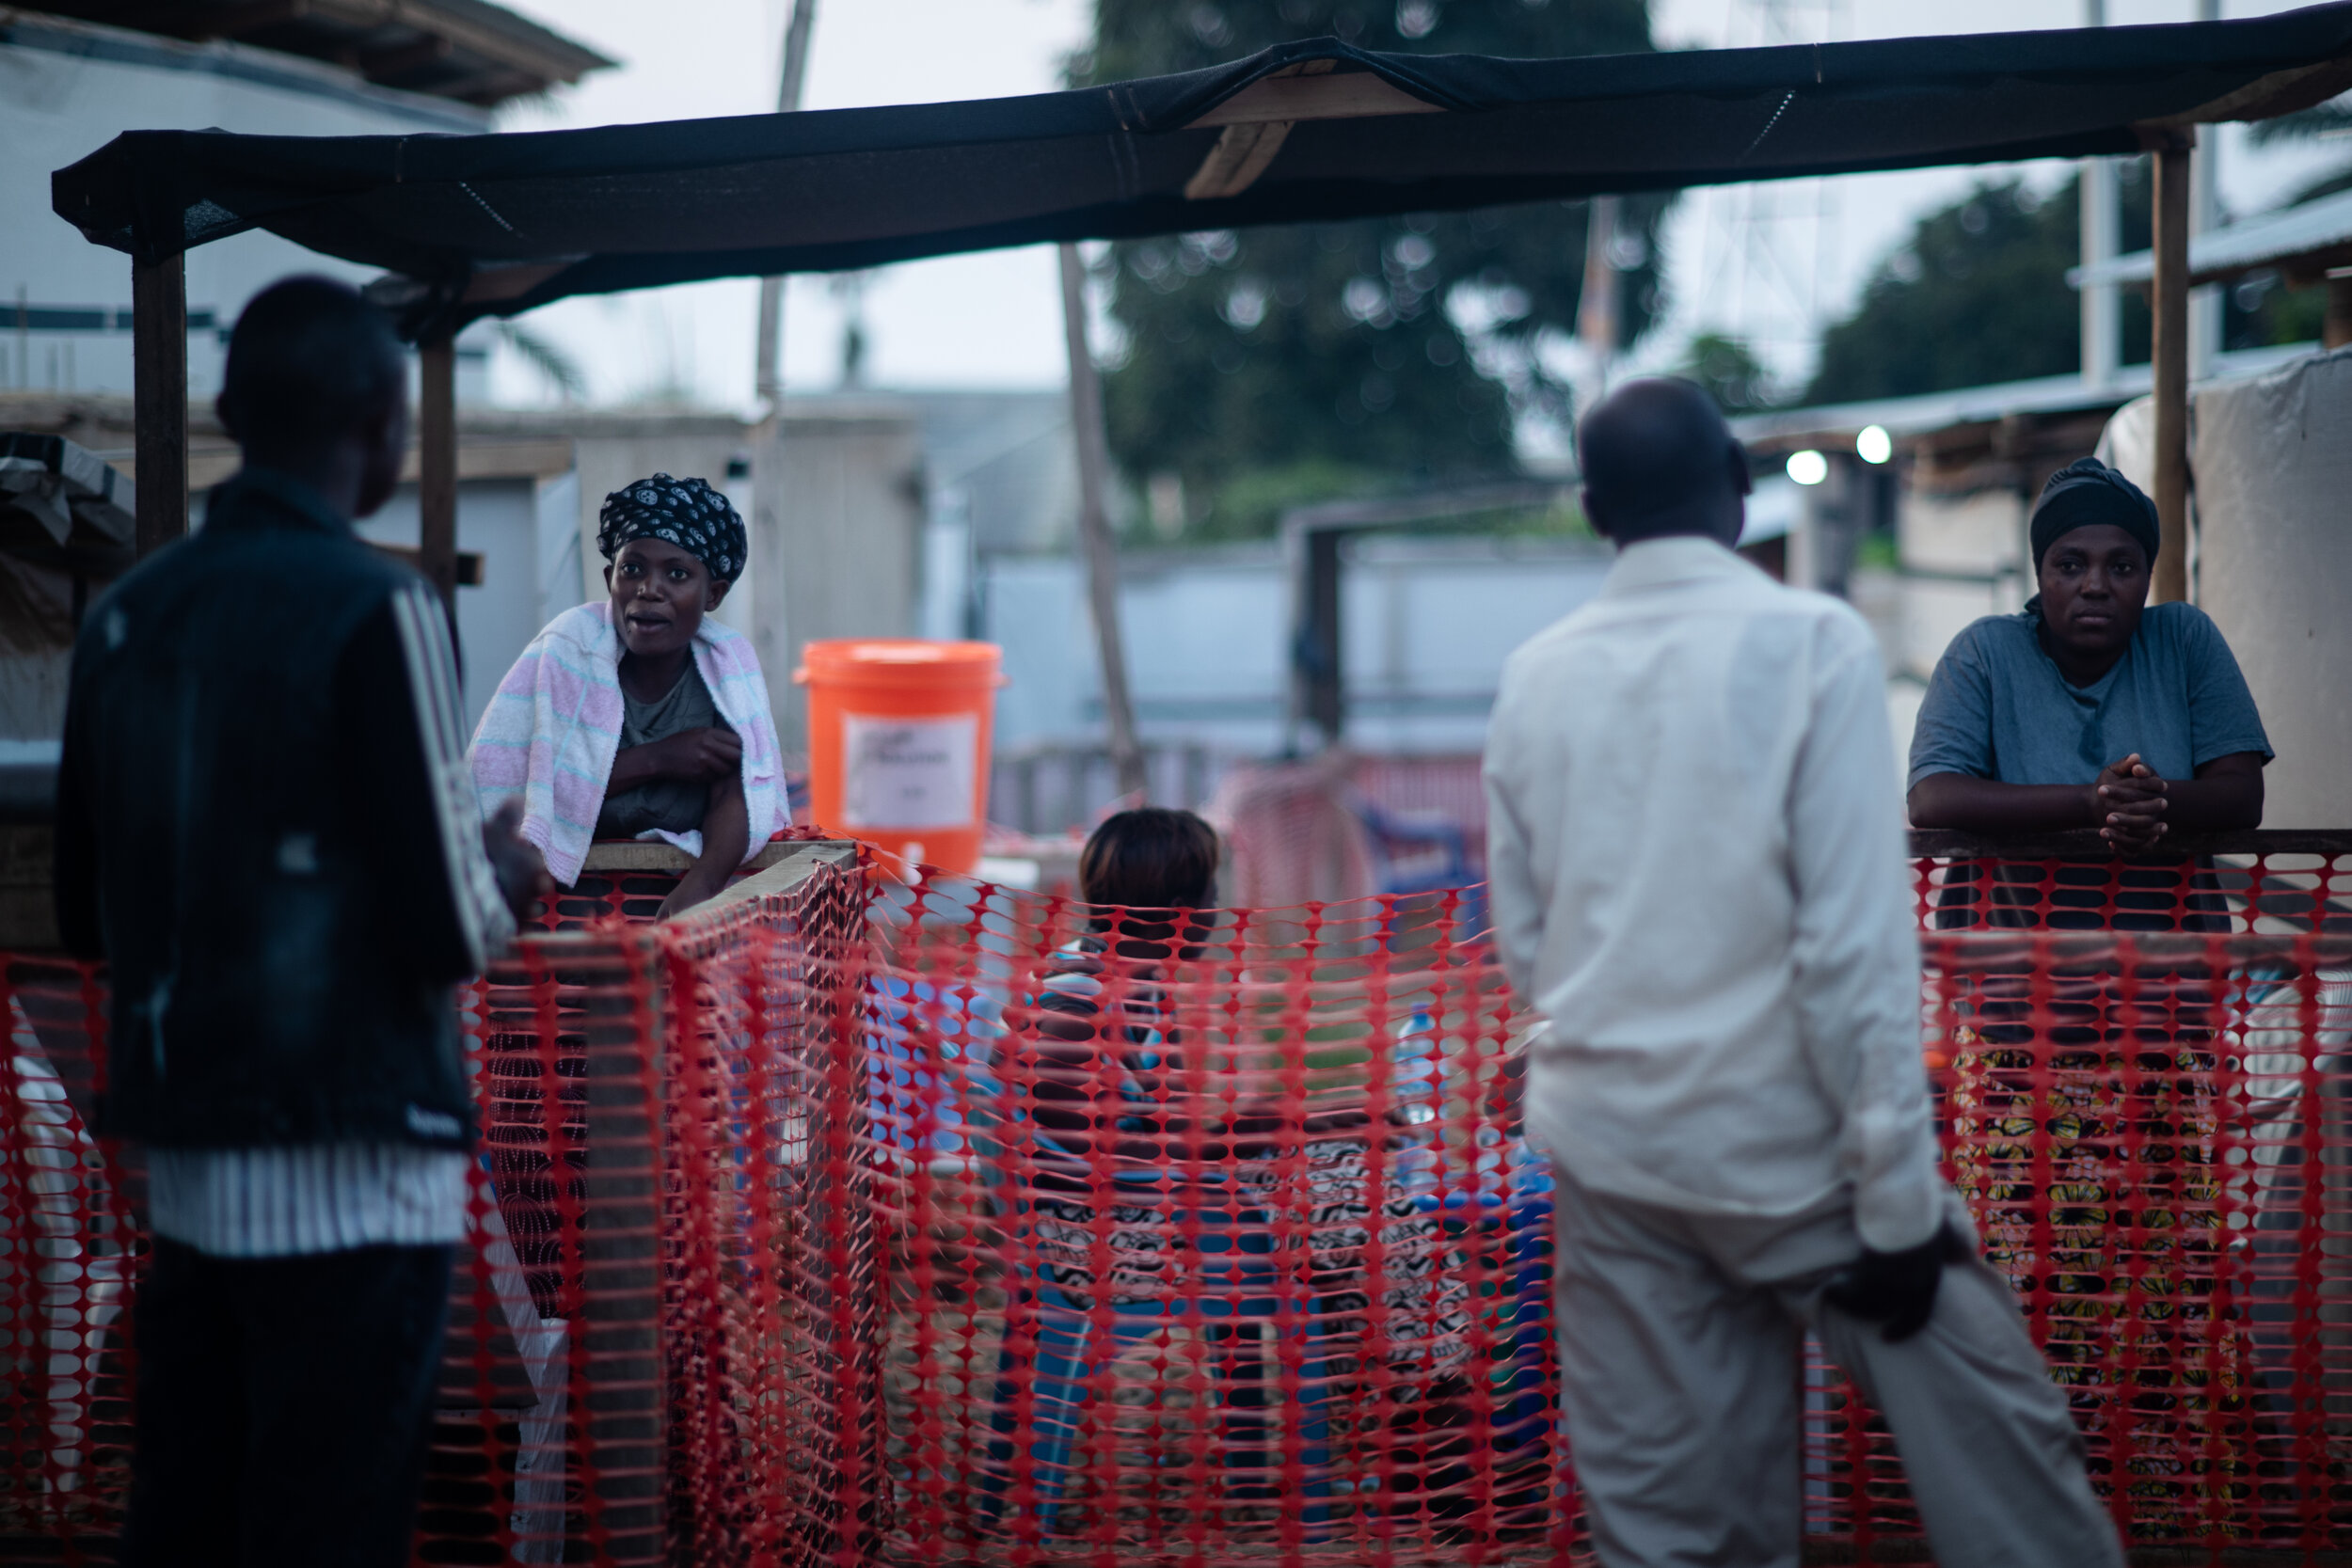  family members visit the recovering patients while standing at a safe distance, at Beni Ebola treatment center, The Democratic Republic of Congo, August 2019 